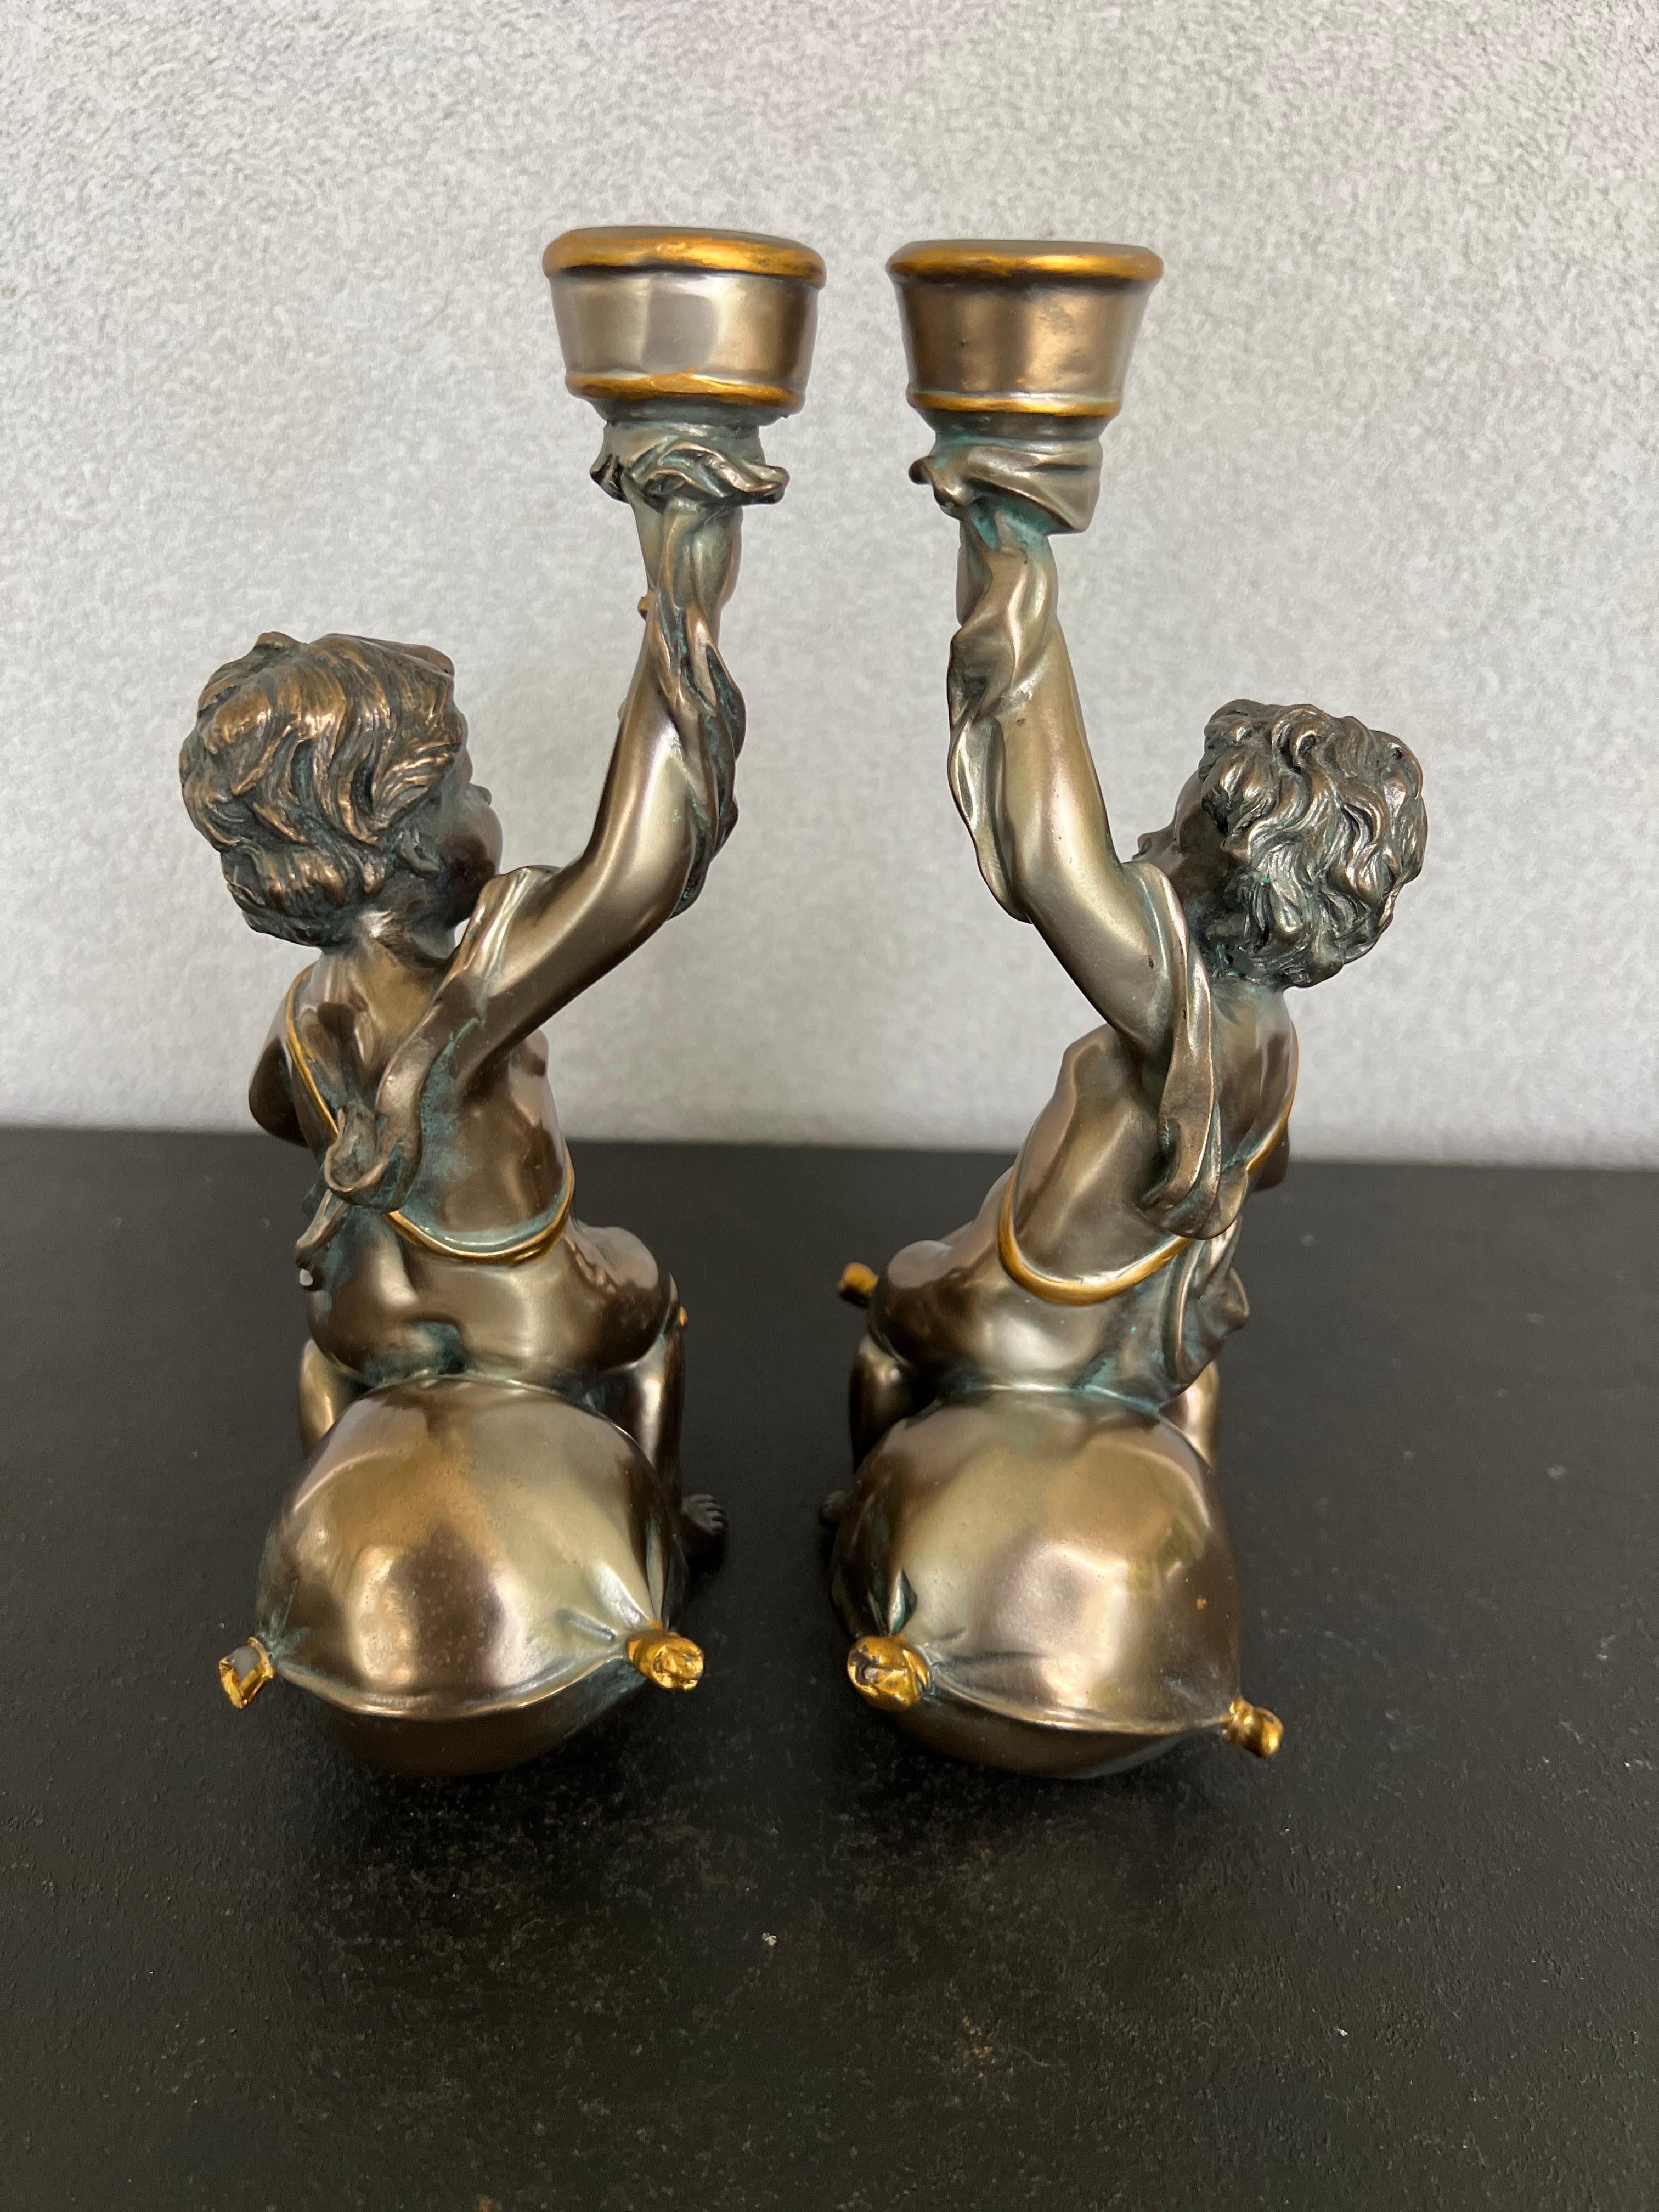 Gorgeous pair of Bacchus candlesticks in an antique bronze color, I believe they are made of resin. Beautiful details 
Bacchus was the Roman god of agriculture, wine and fertility, equivalent to the Greek god Dionysus.
Great pair to adorn a